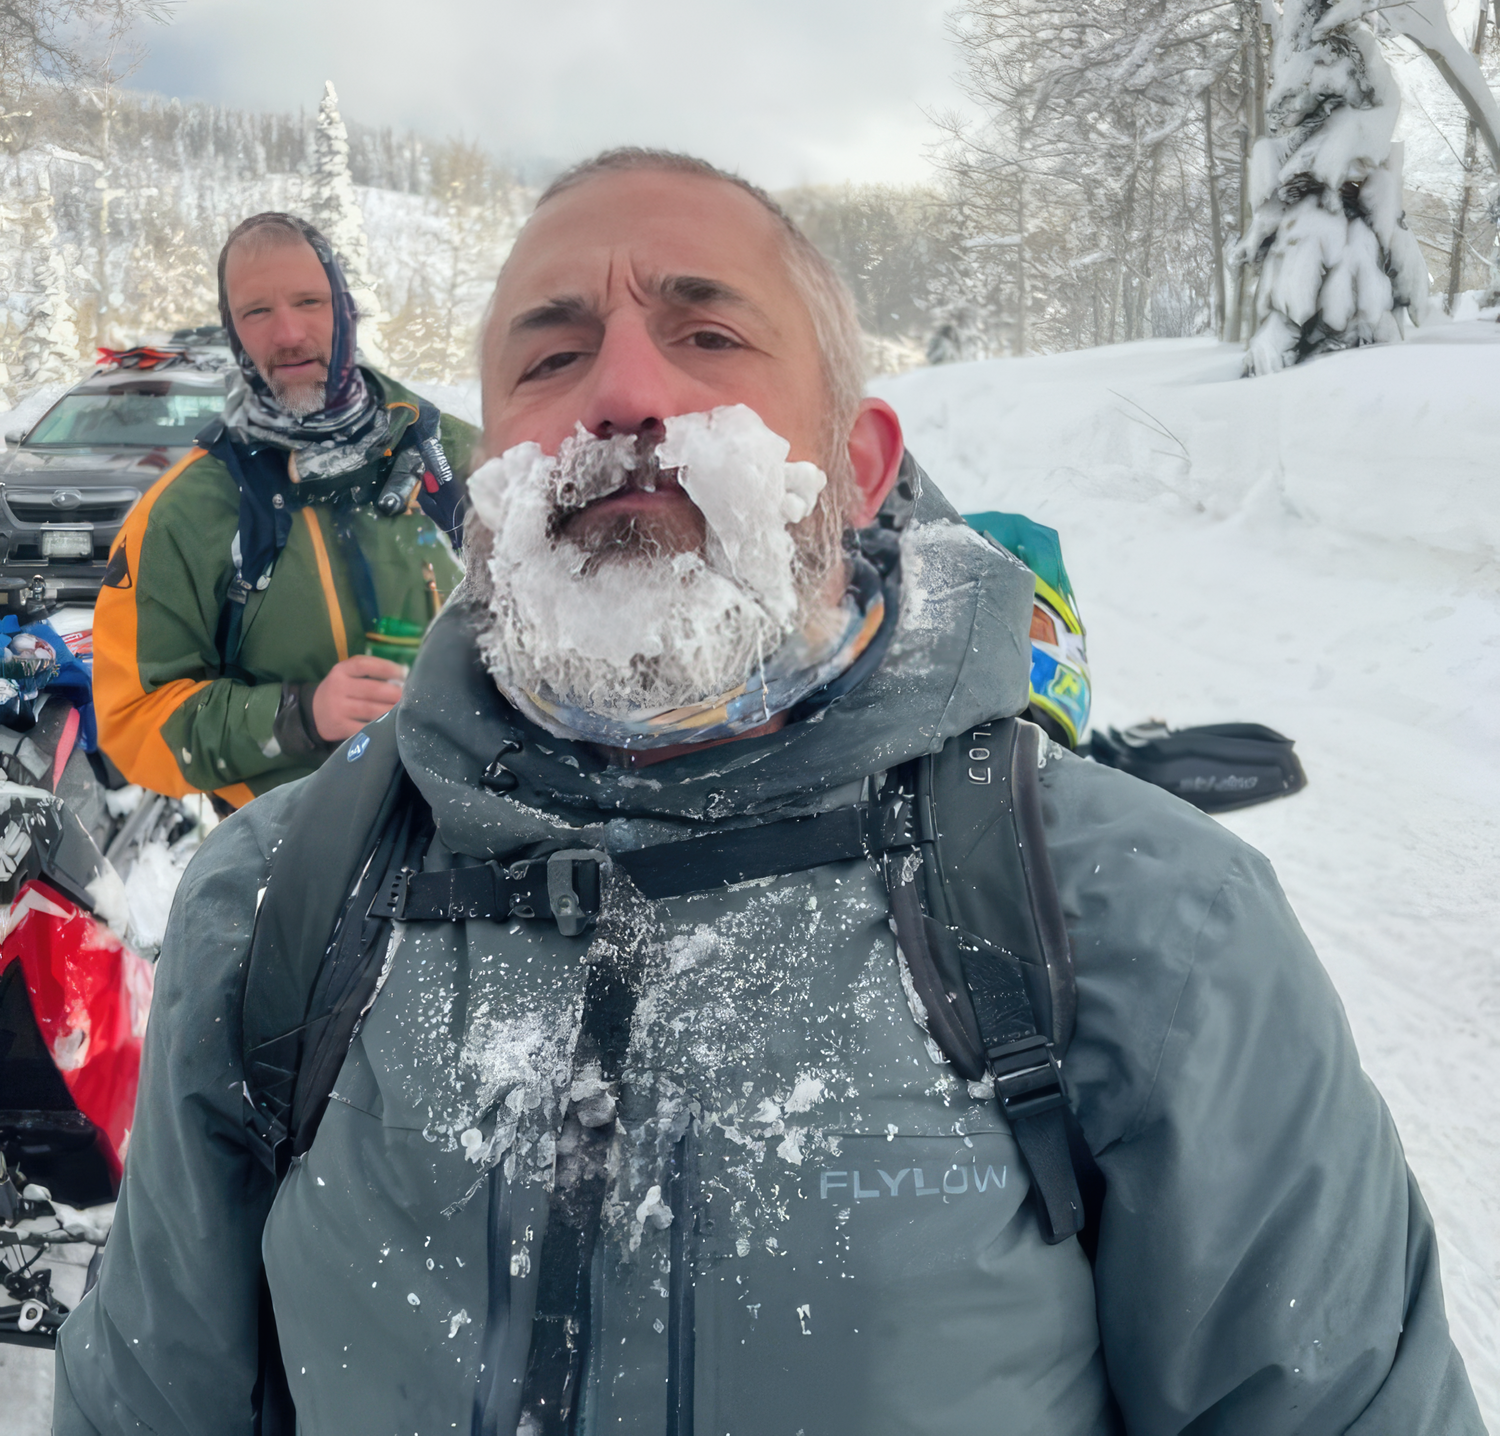 Dave Mars with a snow-covered beard during a winter outing